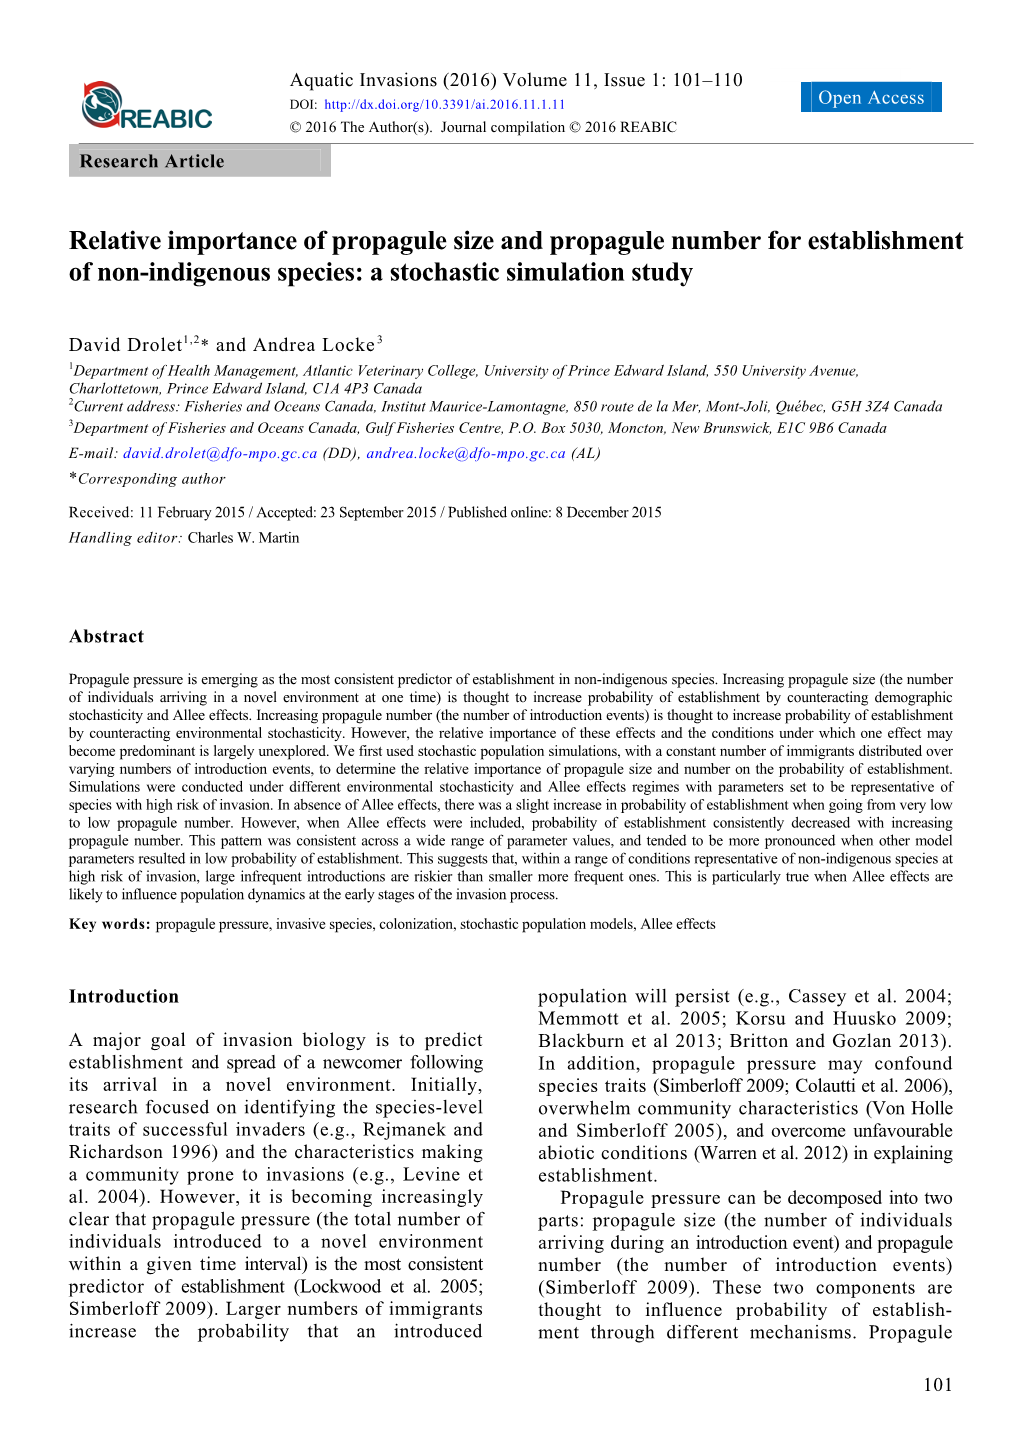 Relative Importance of Propagule Size and Propagule Number for Establishment of Non-Indigenous Species: a Stochastic Simulation Study